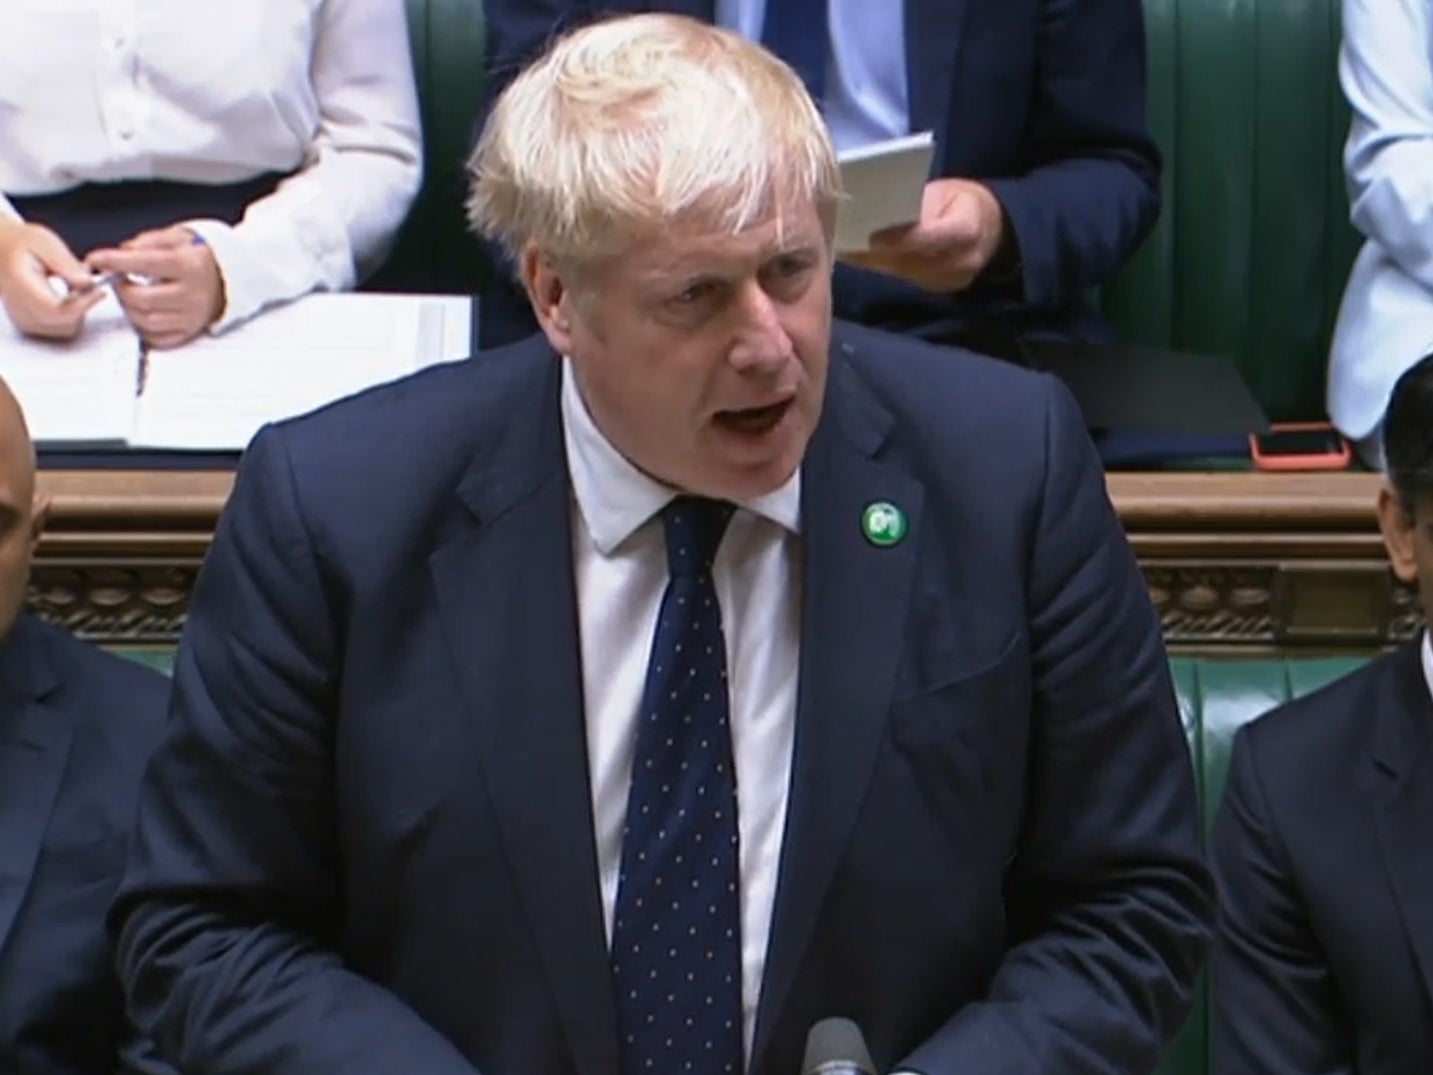 Boris Johnson in the Commons making a statement about tax reform to pay for the NHS and the social care crisis